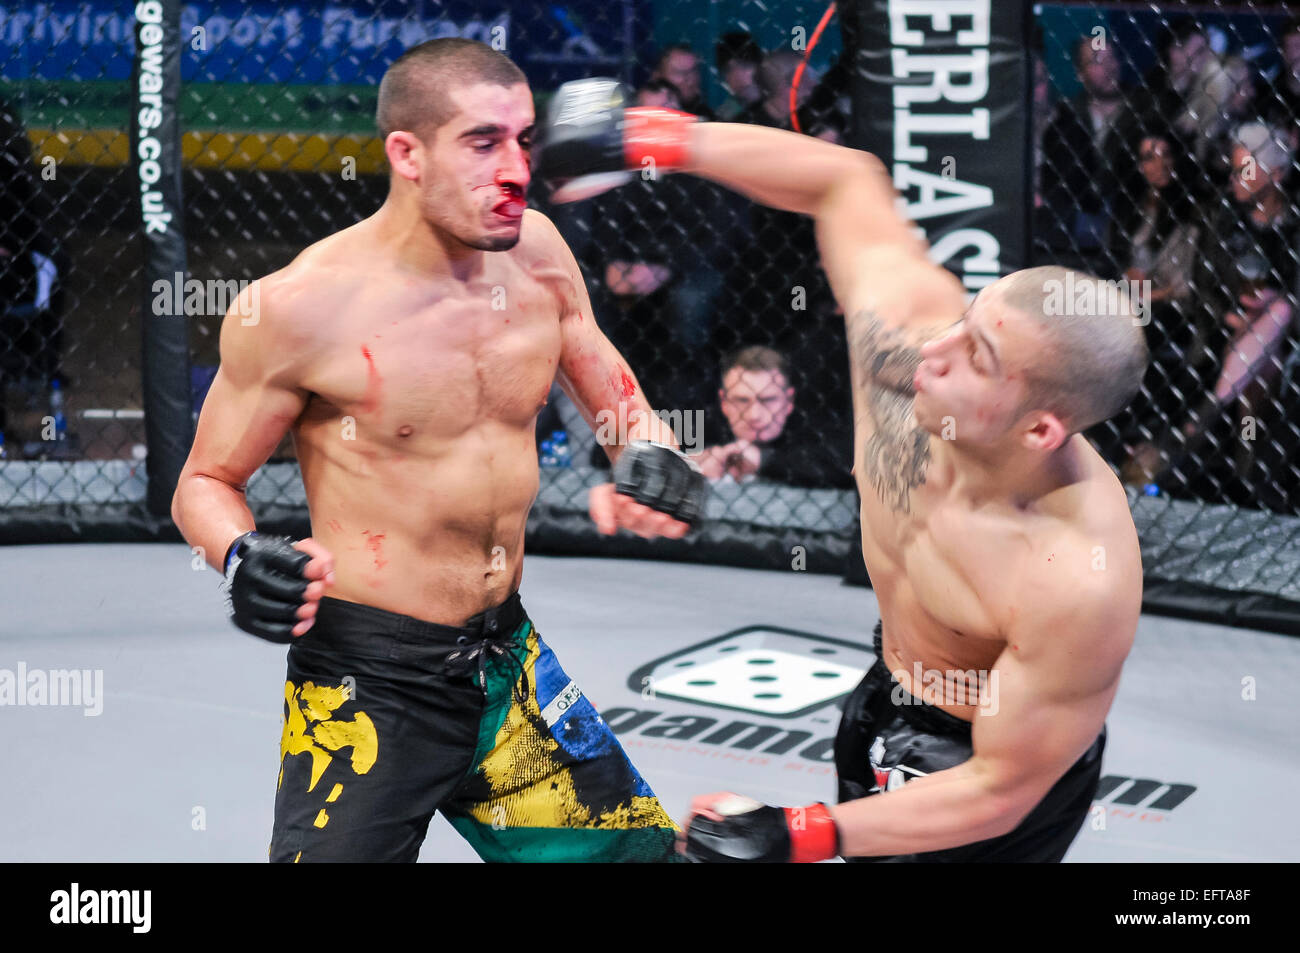 MMA cage fighter punches his opponent in the head after previously breaking his nose. Stock Photo